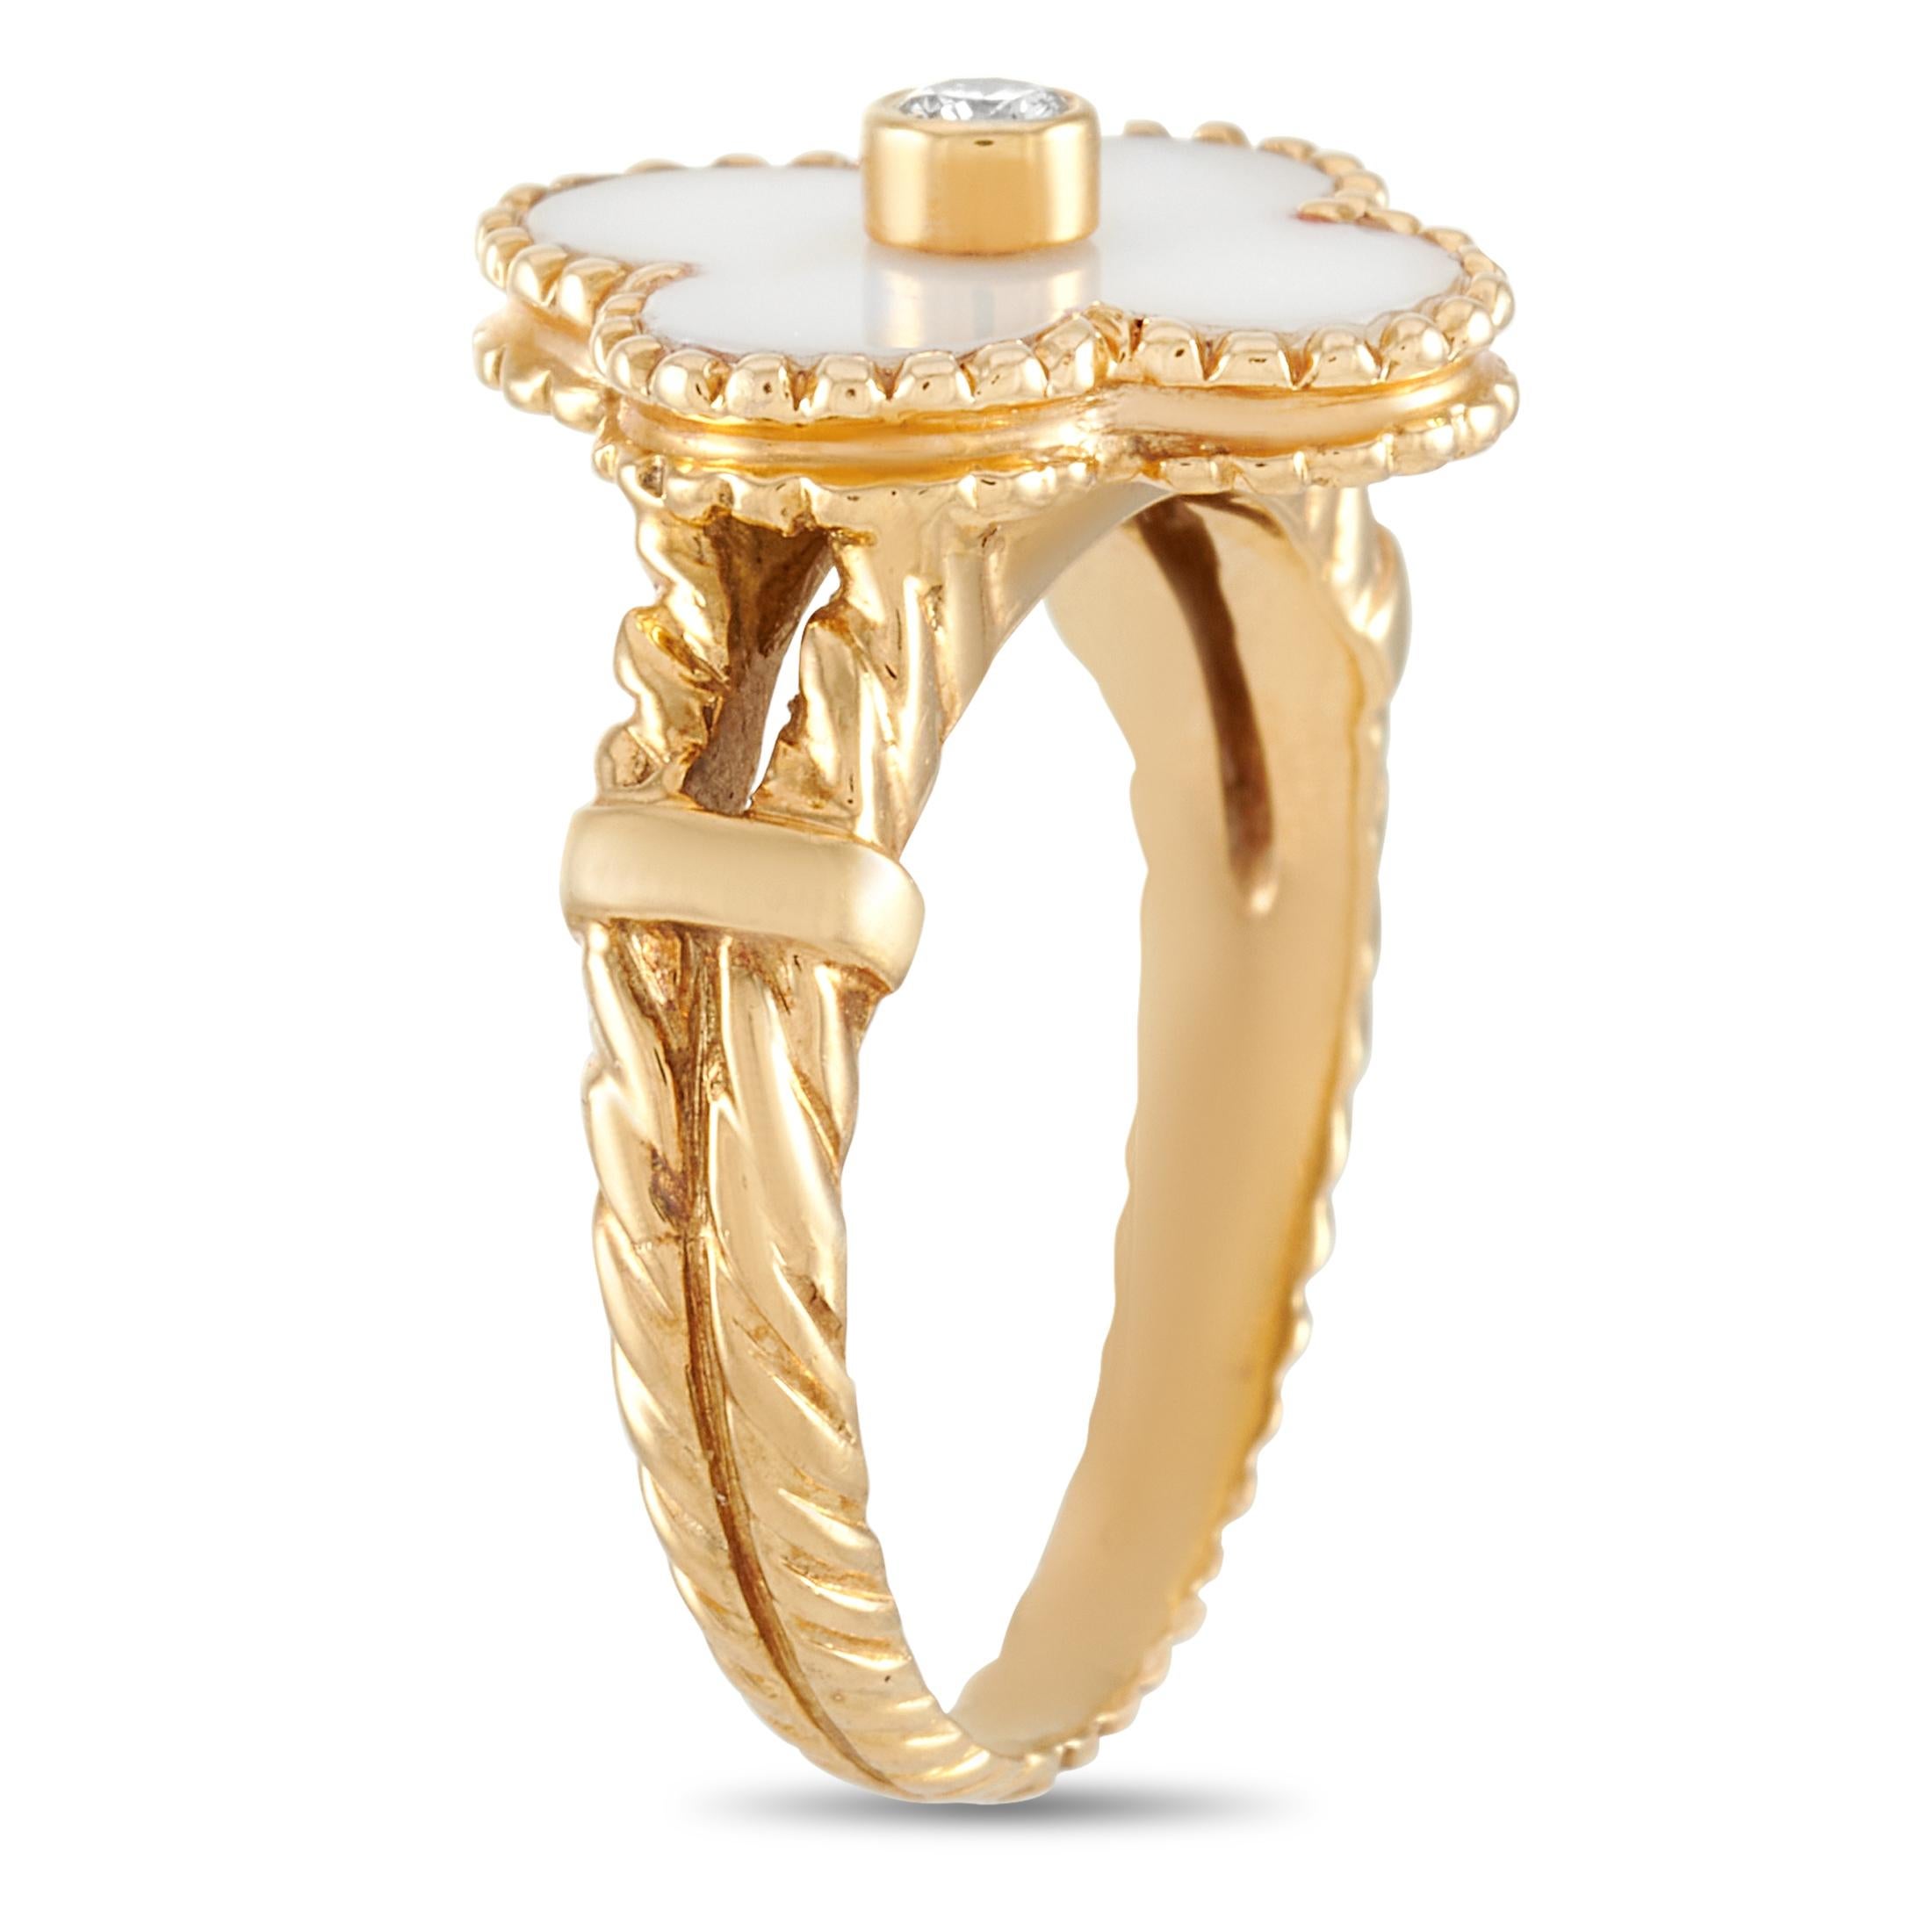 The Van Cleef & Arpels “Vintage Alhambra” ring is made of 18K yellow gold and embellished with white coral and a diamond stone. The ring weighs 4.8 grams and boasts band thickness of 3 mm and top height of 5 mm, while top dimensions measure 10 by 17